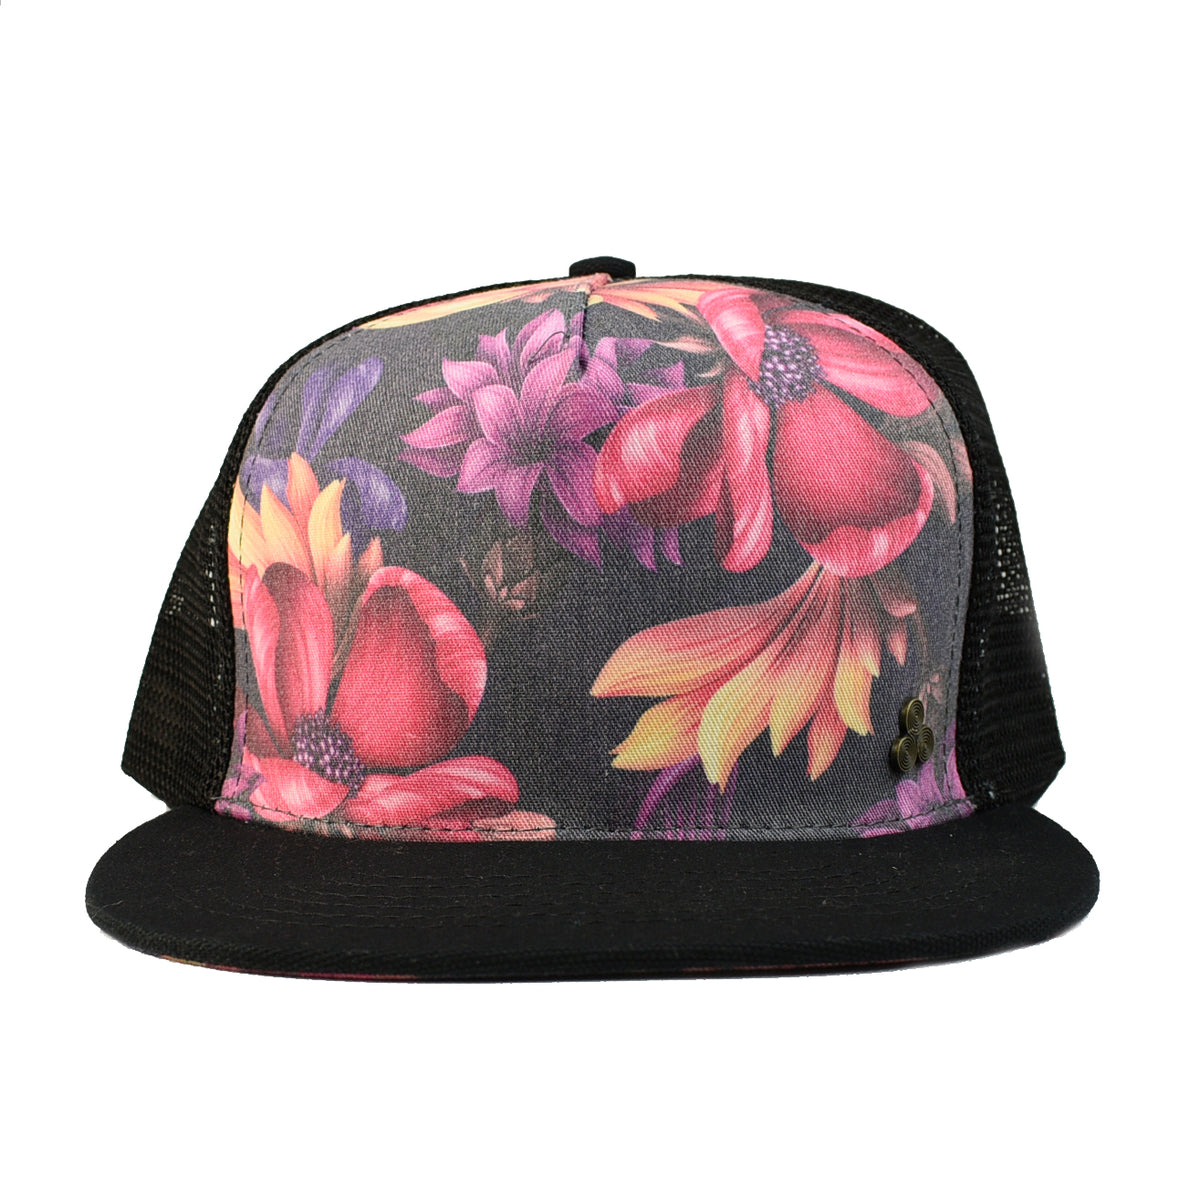 Floral Trucker Hat for Men and Women| Eco-Friendly Caps